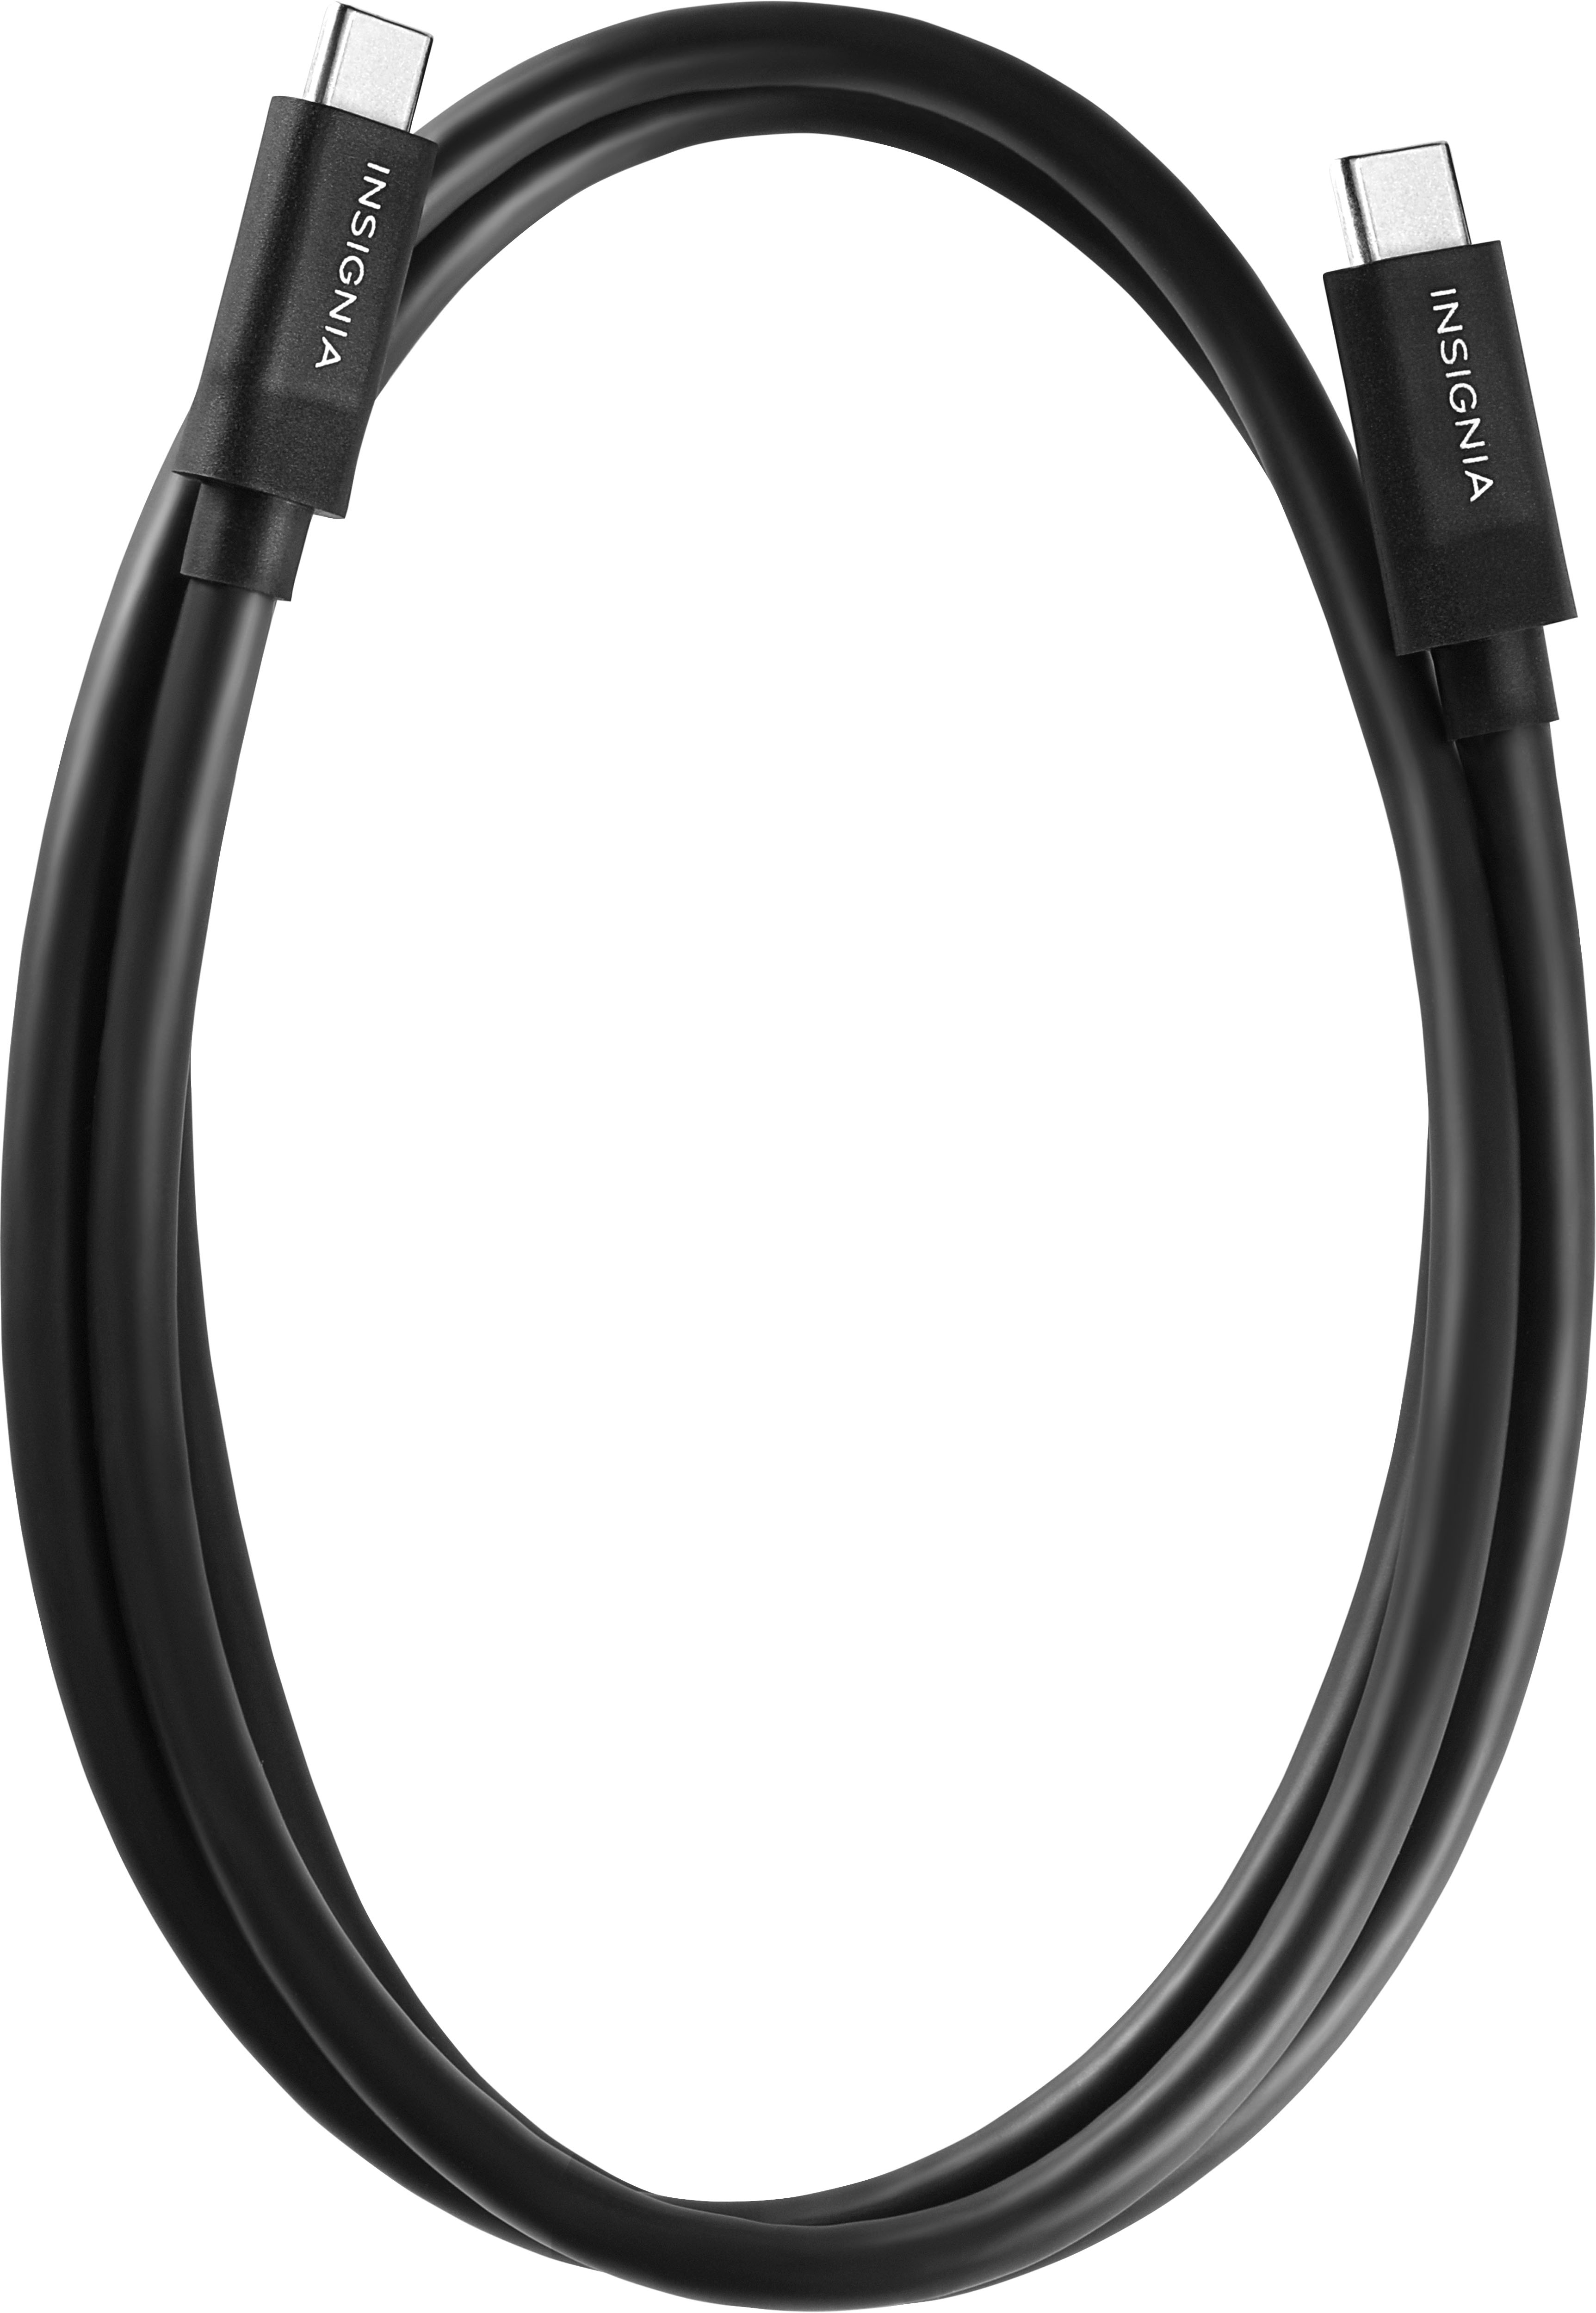 Insignia™ 3.3' USB-C to USB-C 3.2 Gen 2 Superspeed+ 10Gbps Cable Black  NS-PCKCC3 - Best Buy